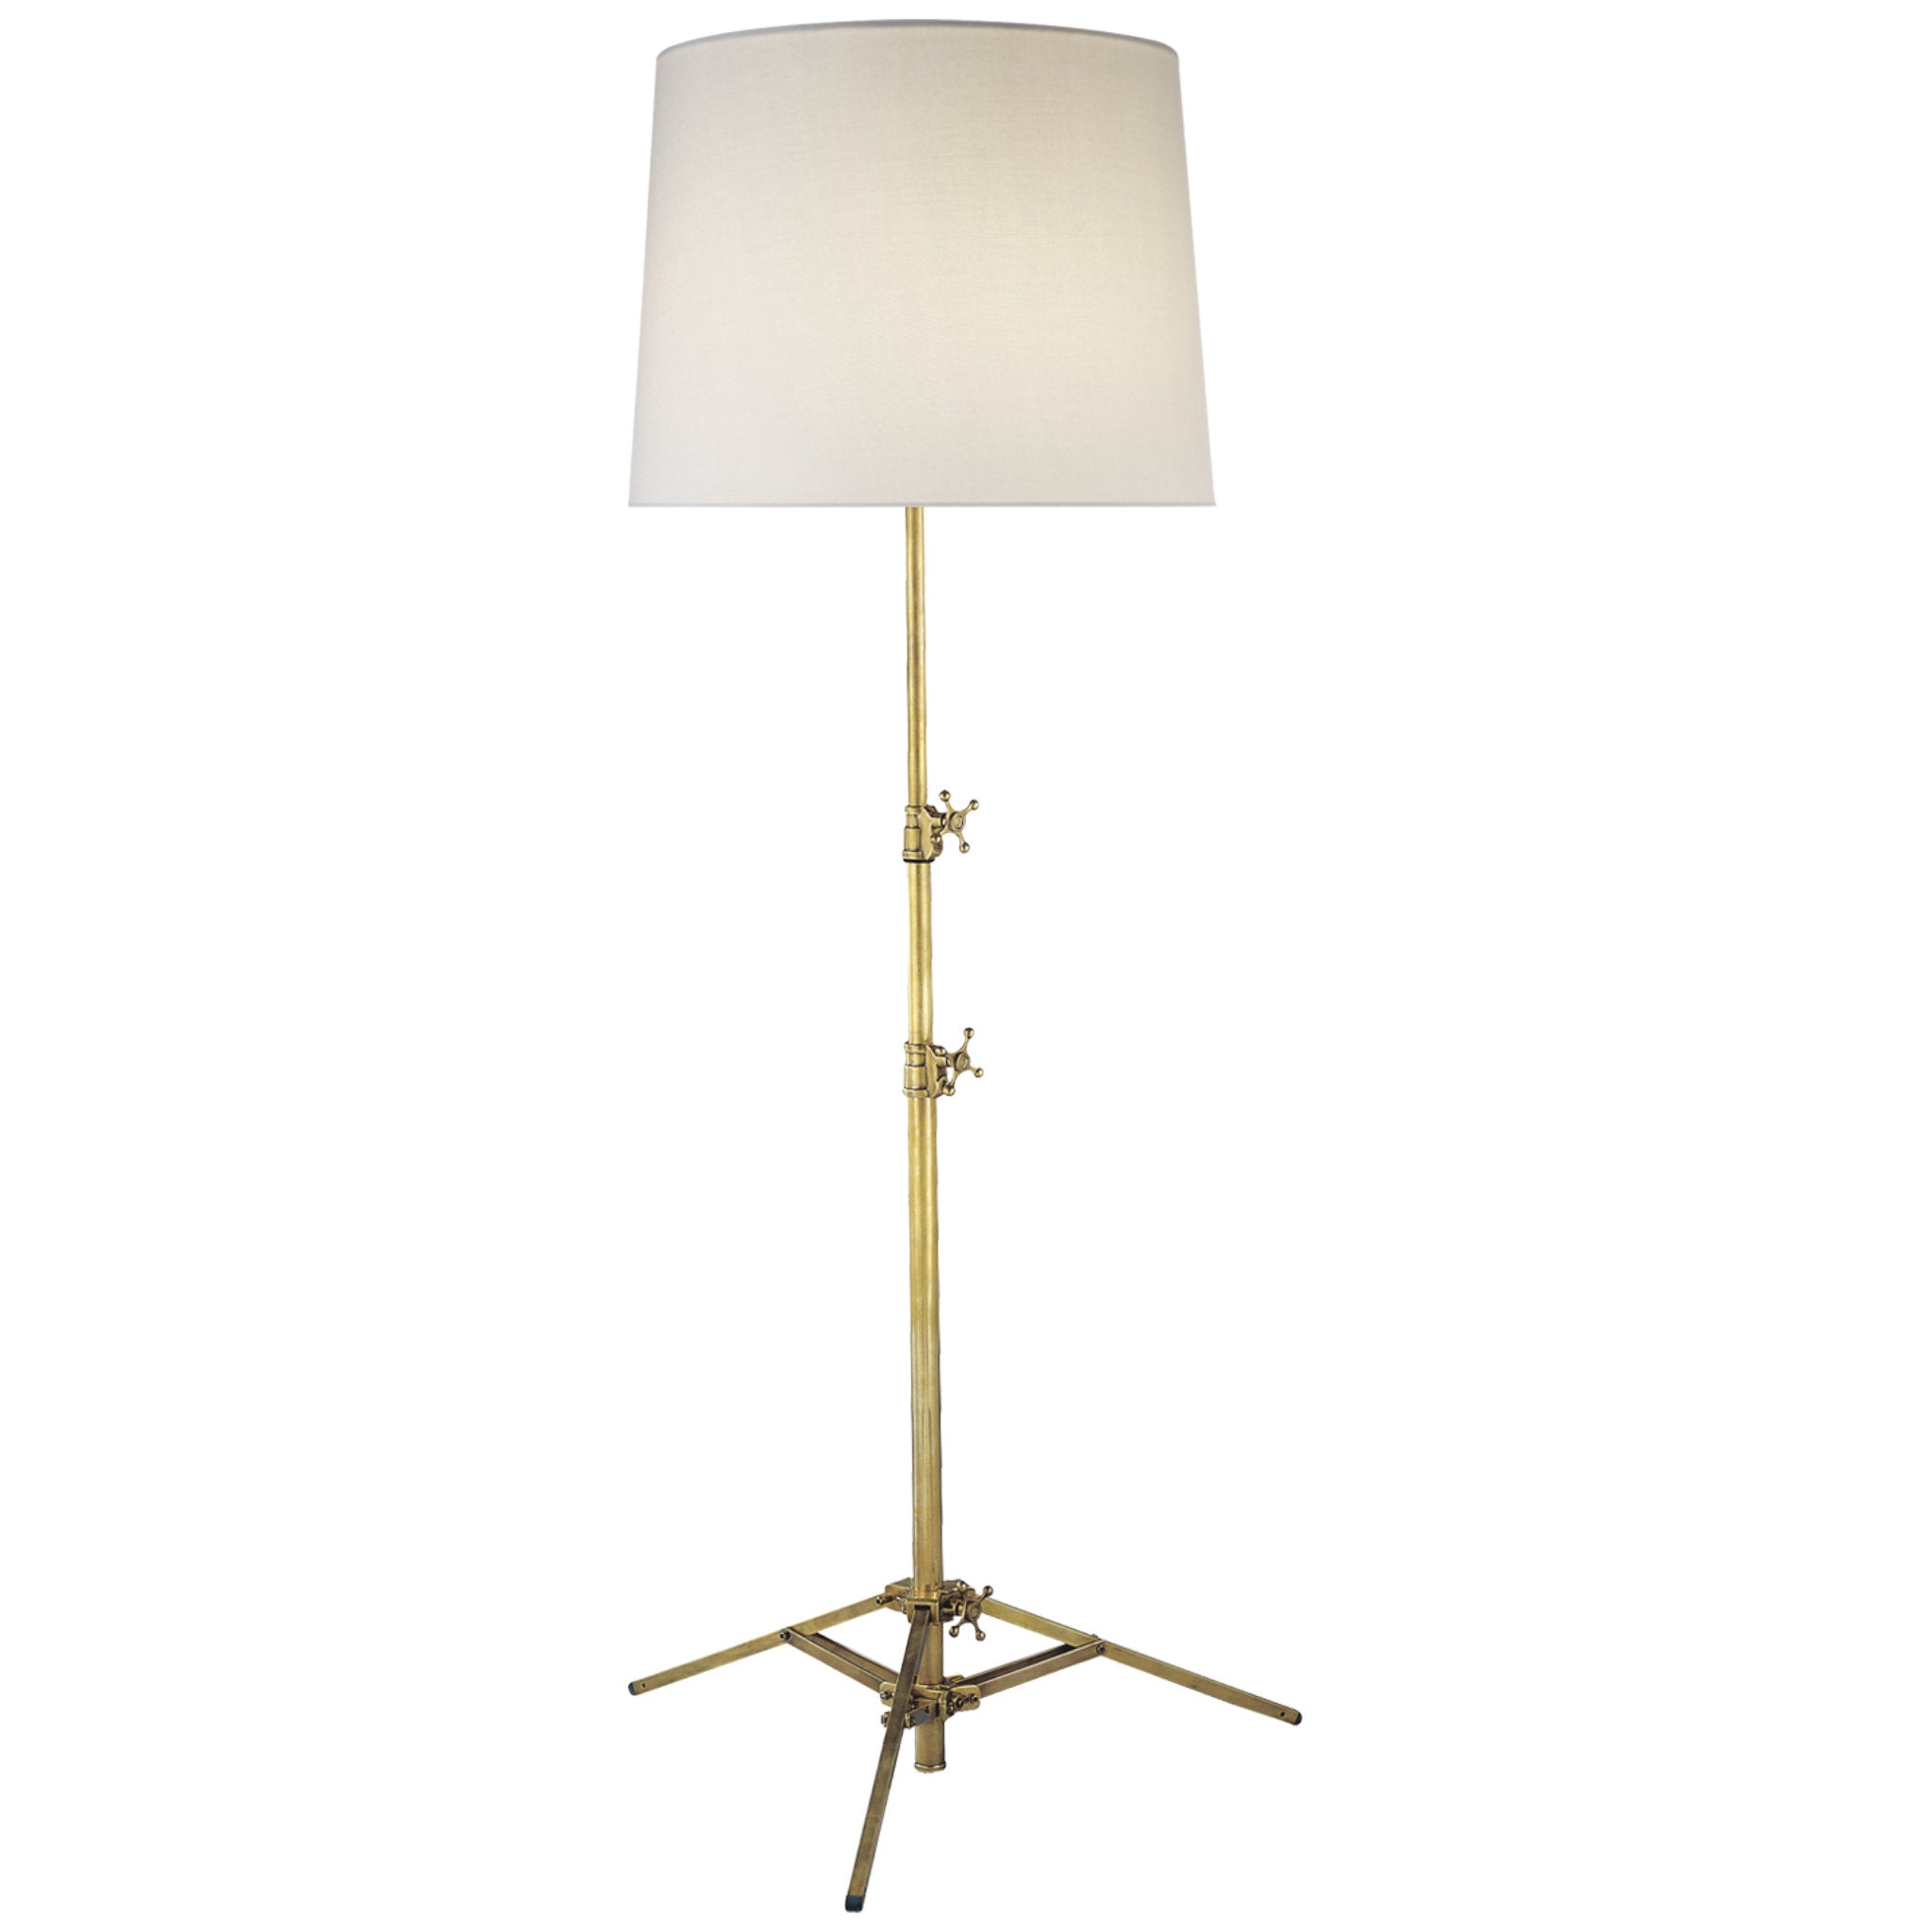 Thomas O'Brien Studio Floor Lamp in Hand-Rubbed Antique Brass with Lin